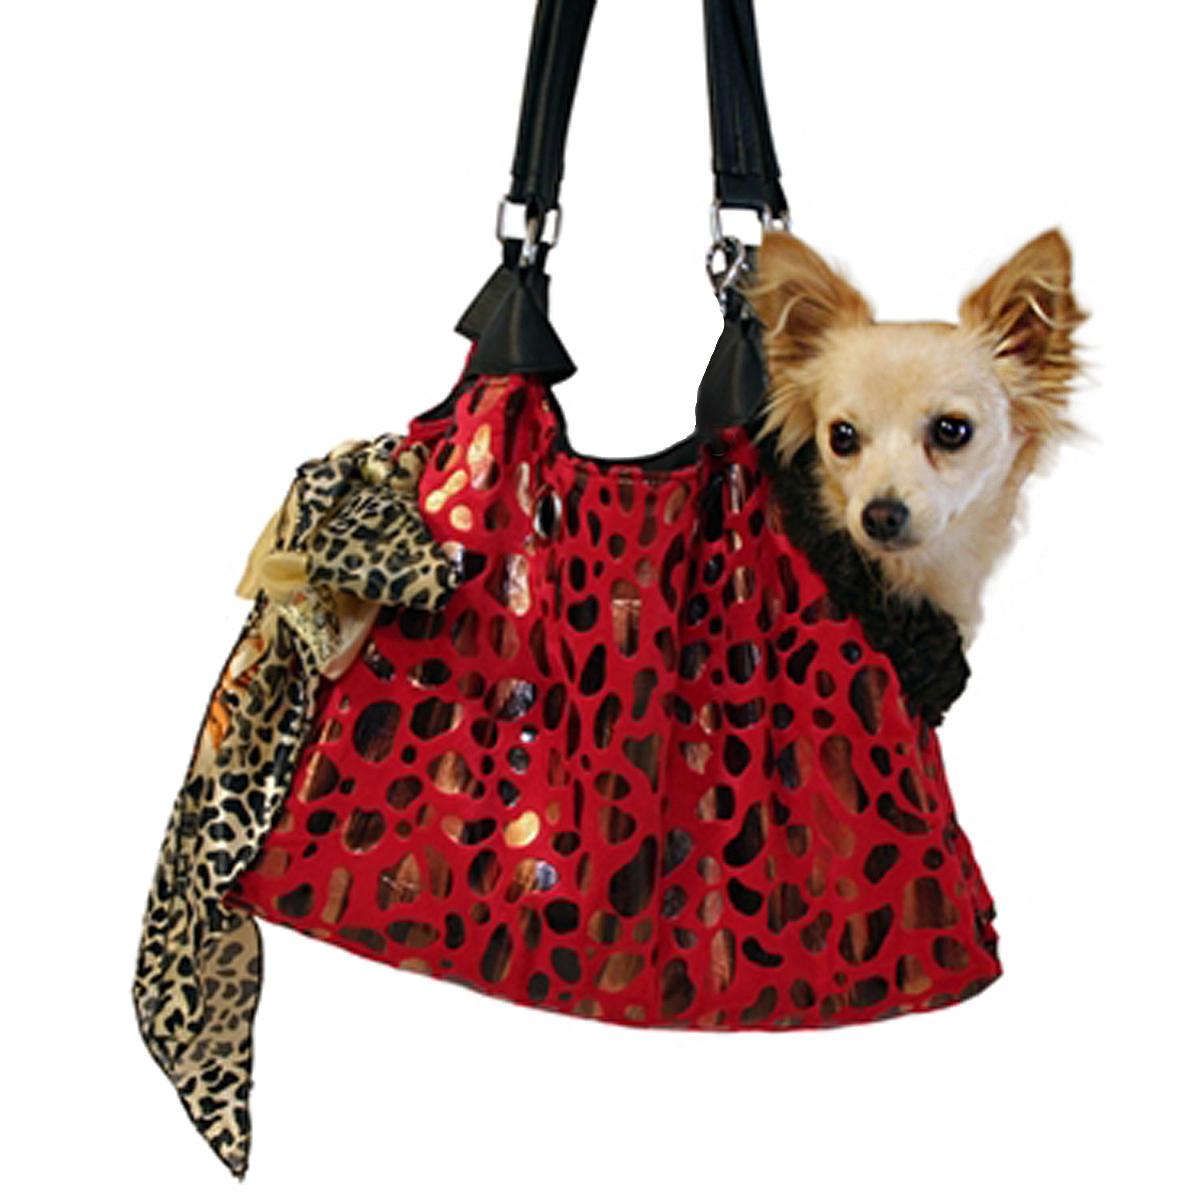 dog tote carrier